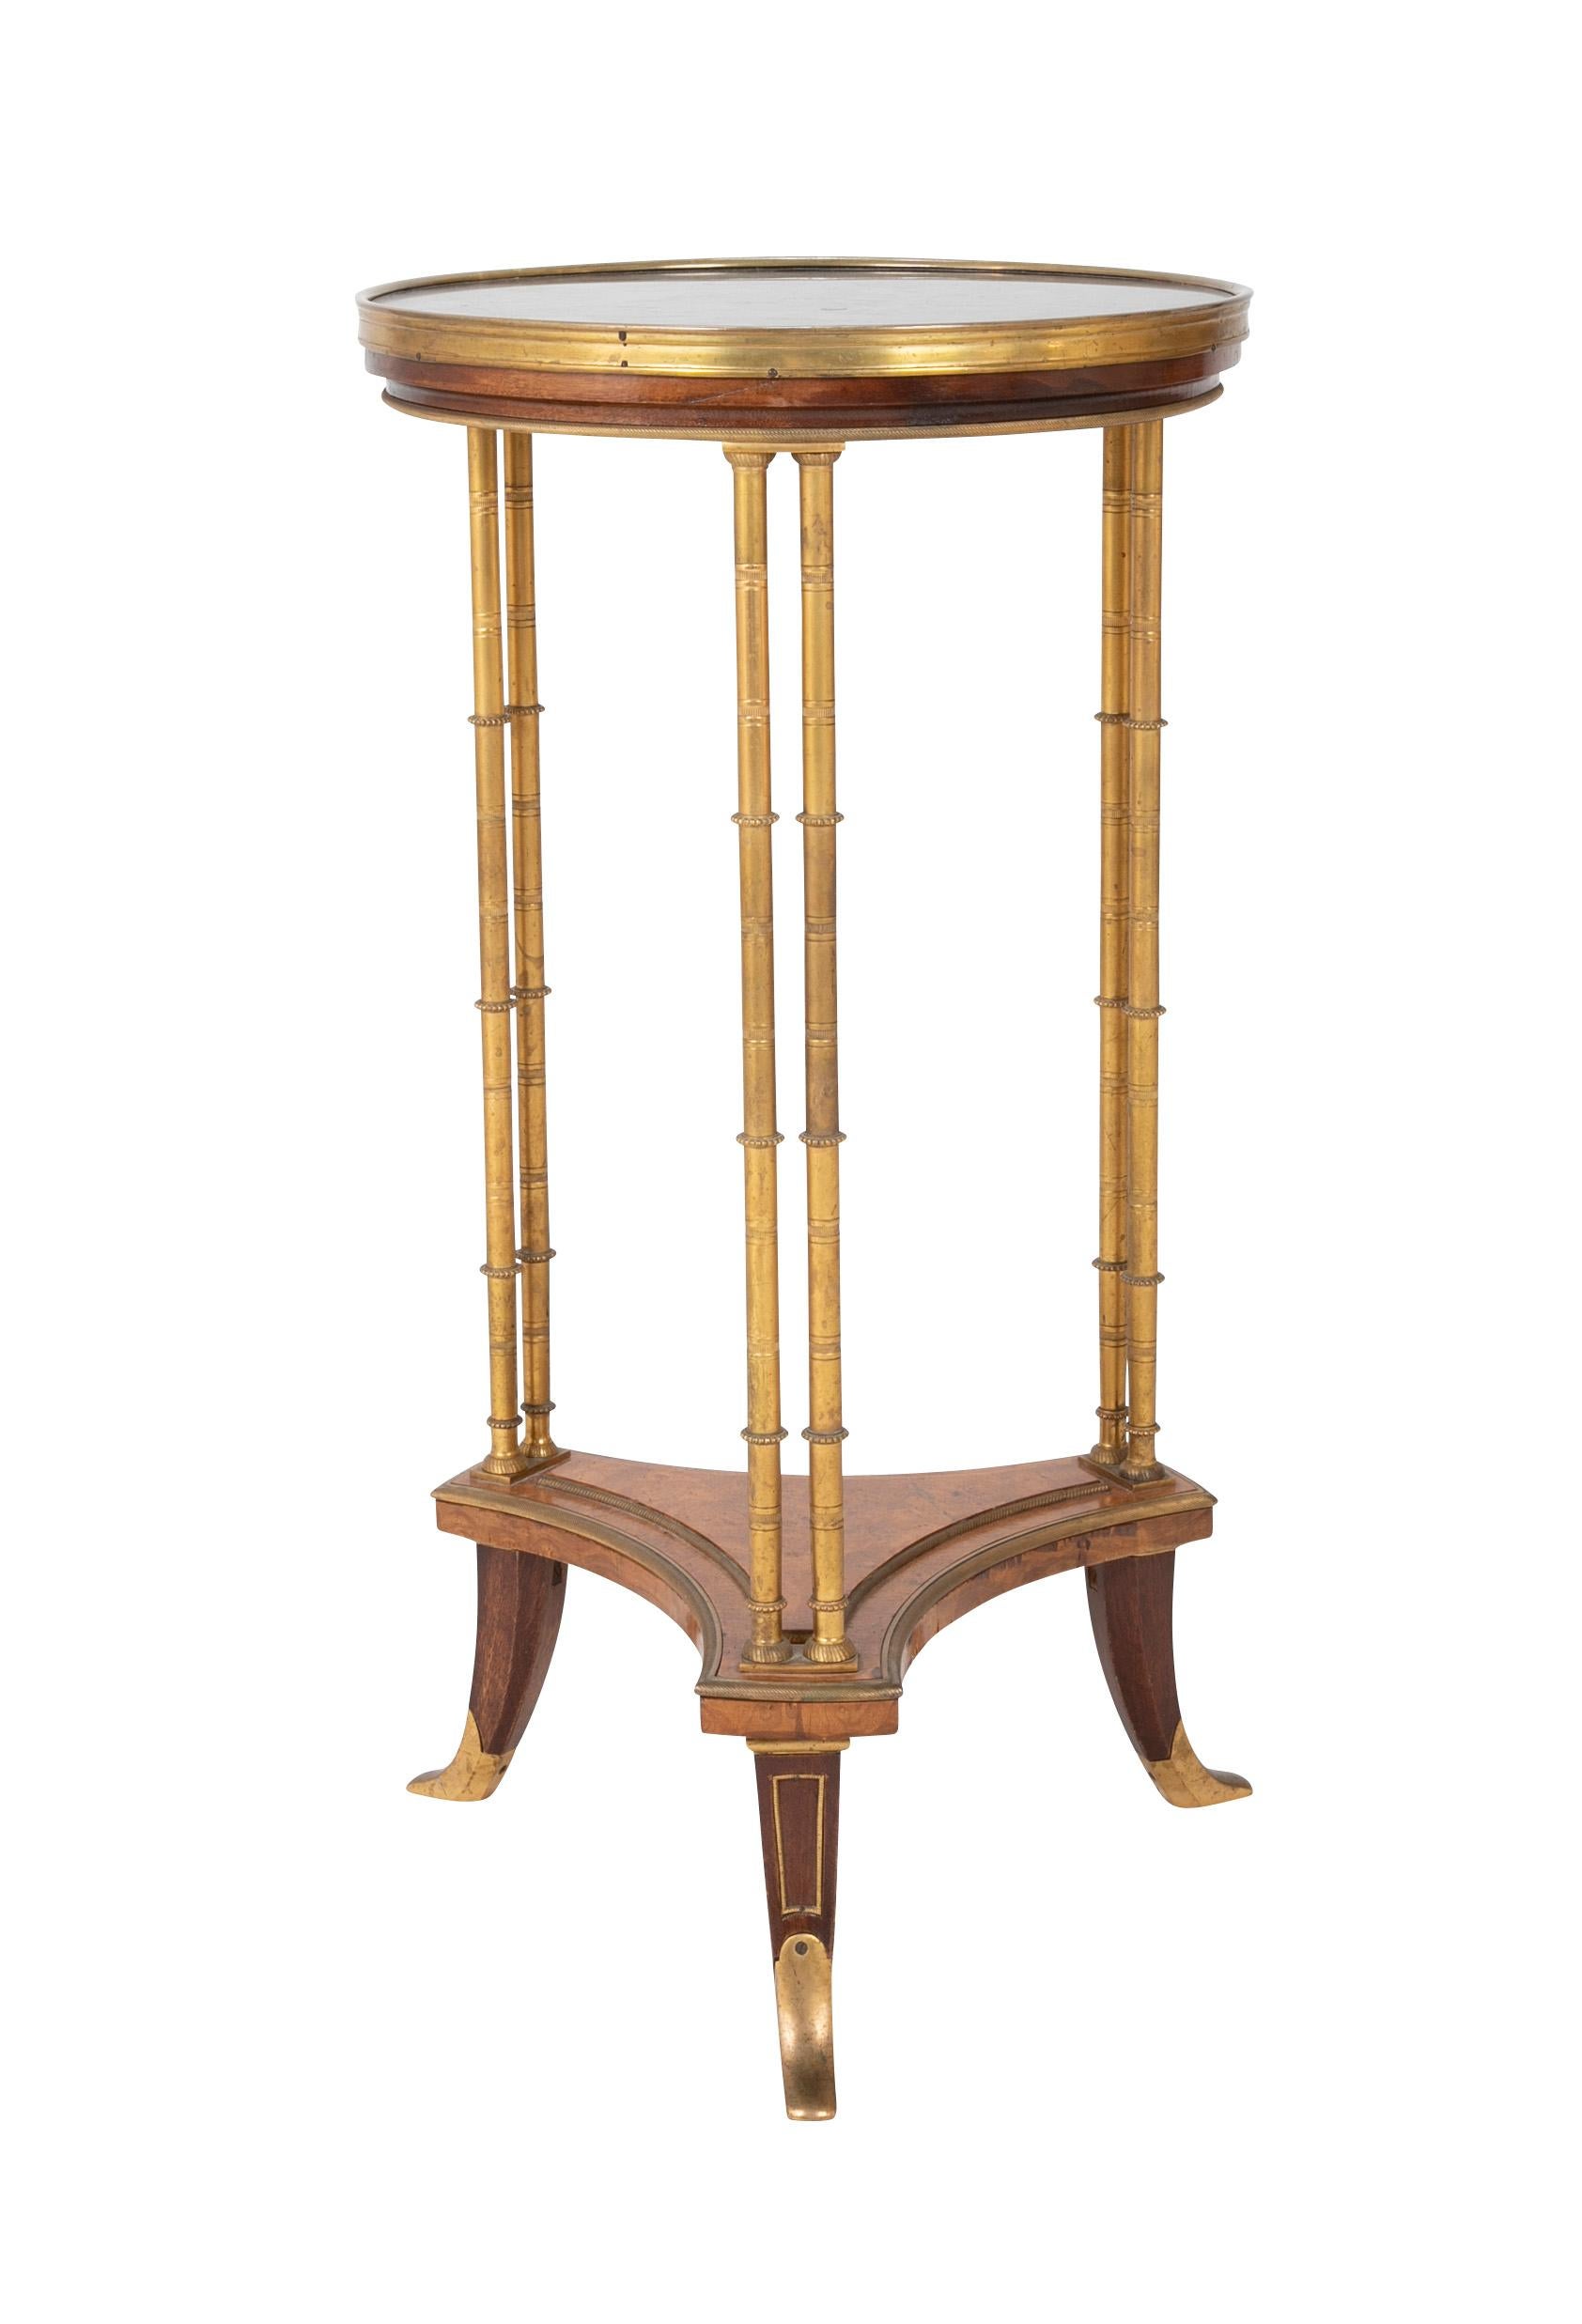 French Louis XVI gilt-bronze mounted Amboyna burr and mahogany Louis XVI style guéridon after the model by Weisweiler (1750-1810) with black marble top.   Circa 1880